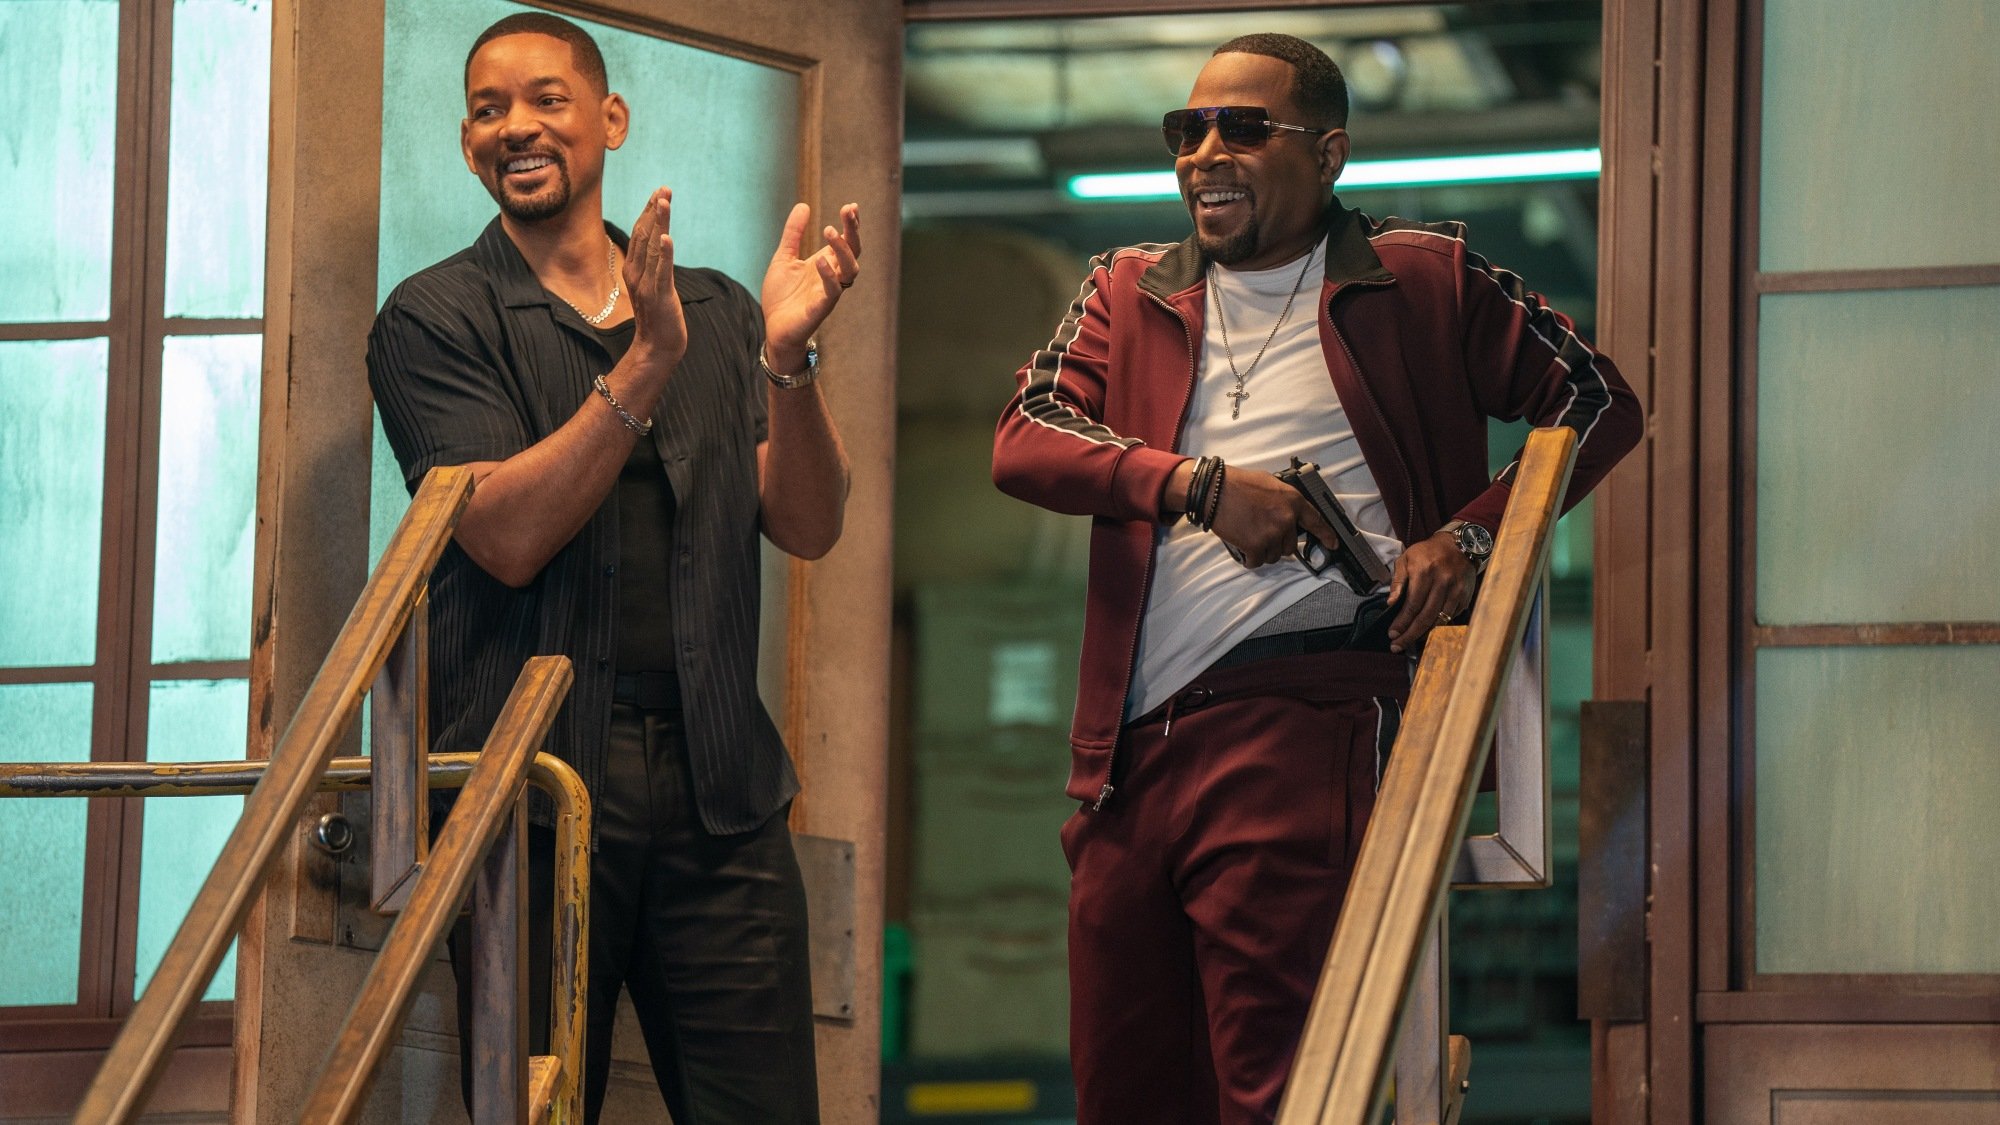 Bad Boys Ride or Die Approaches $300 Million at Worldwide Box Office